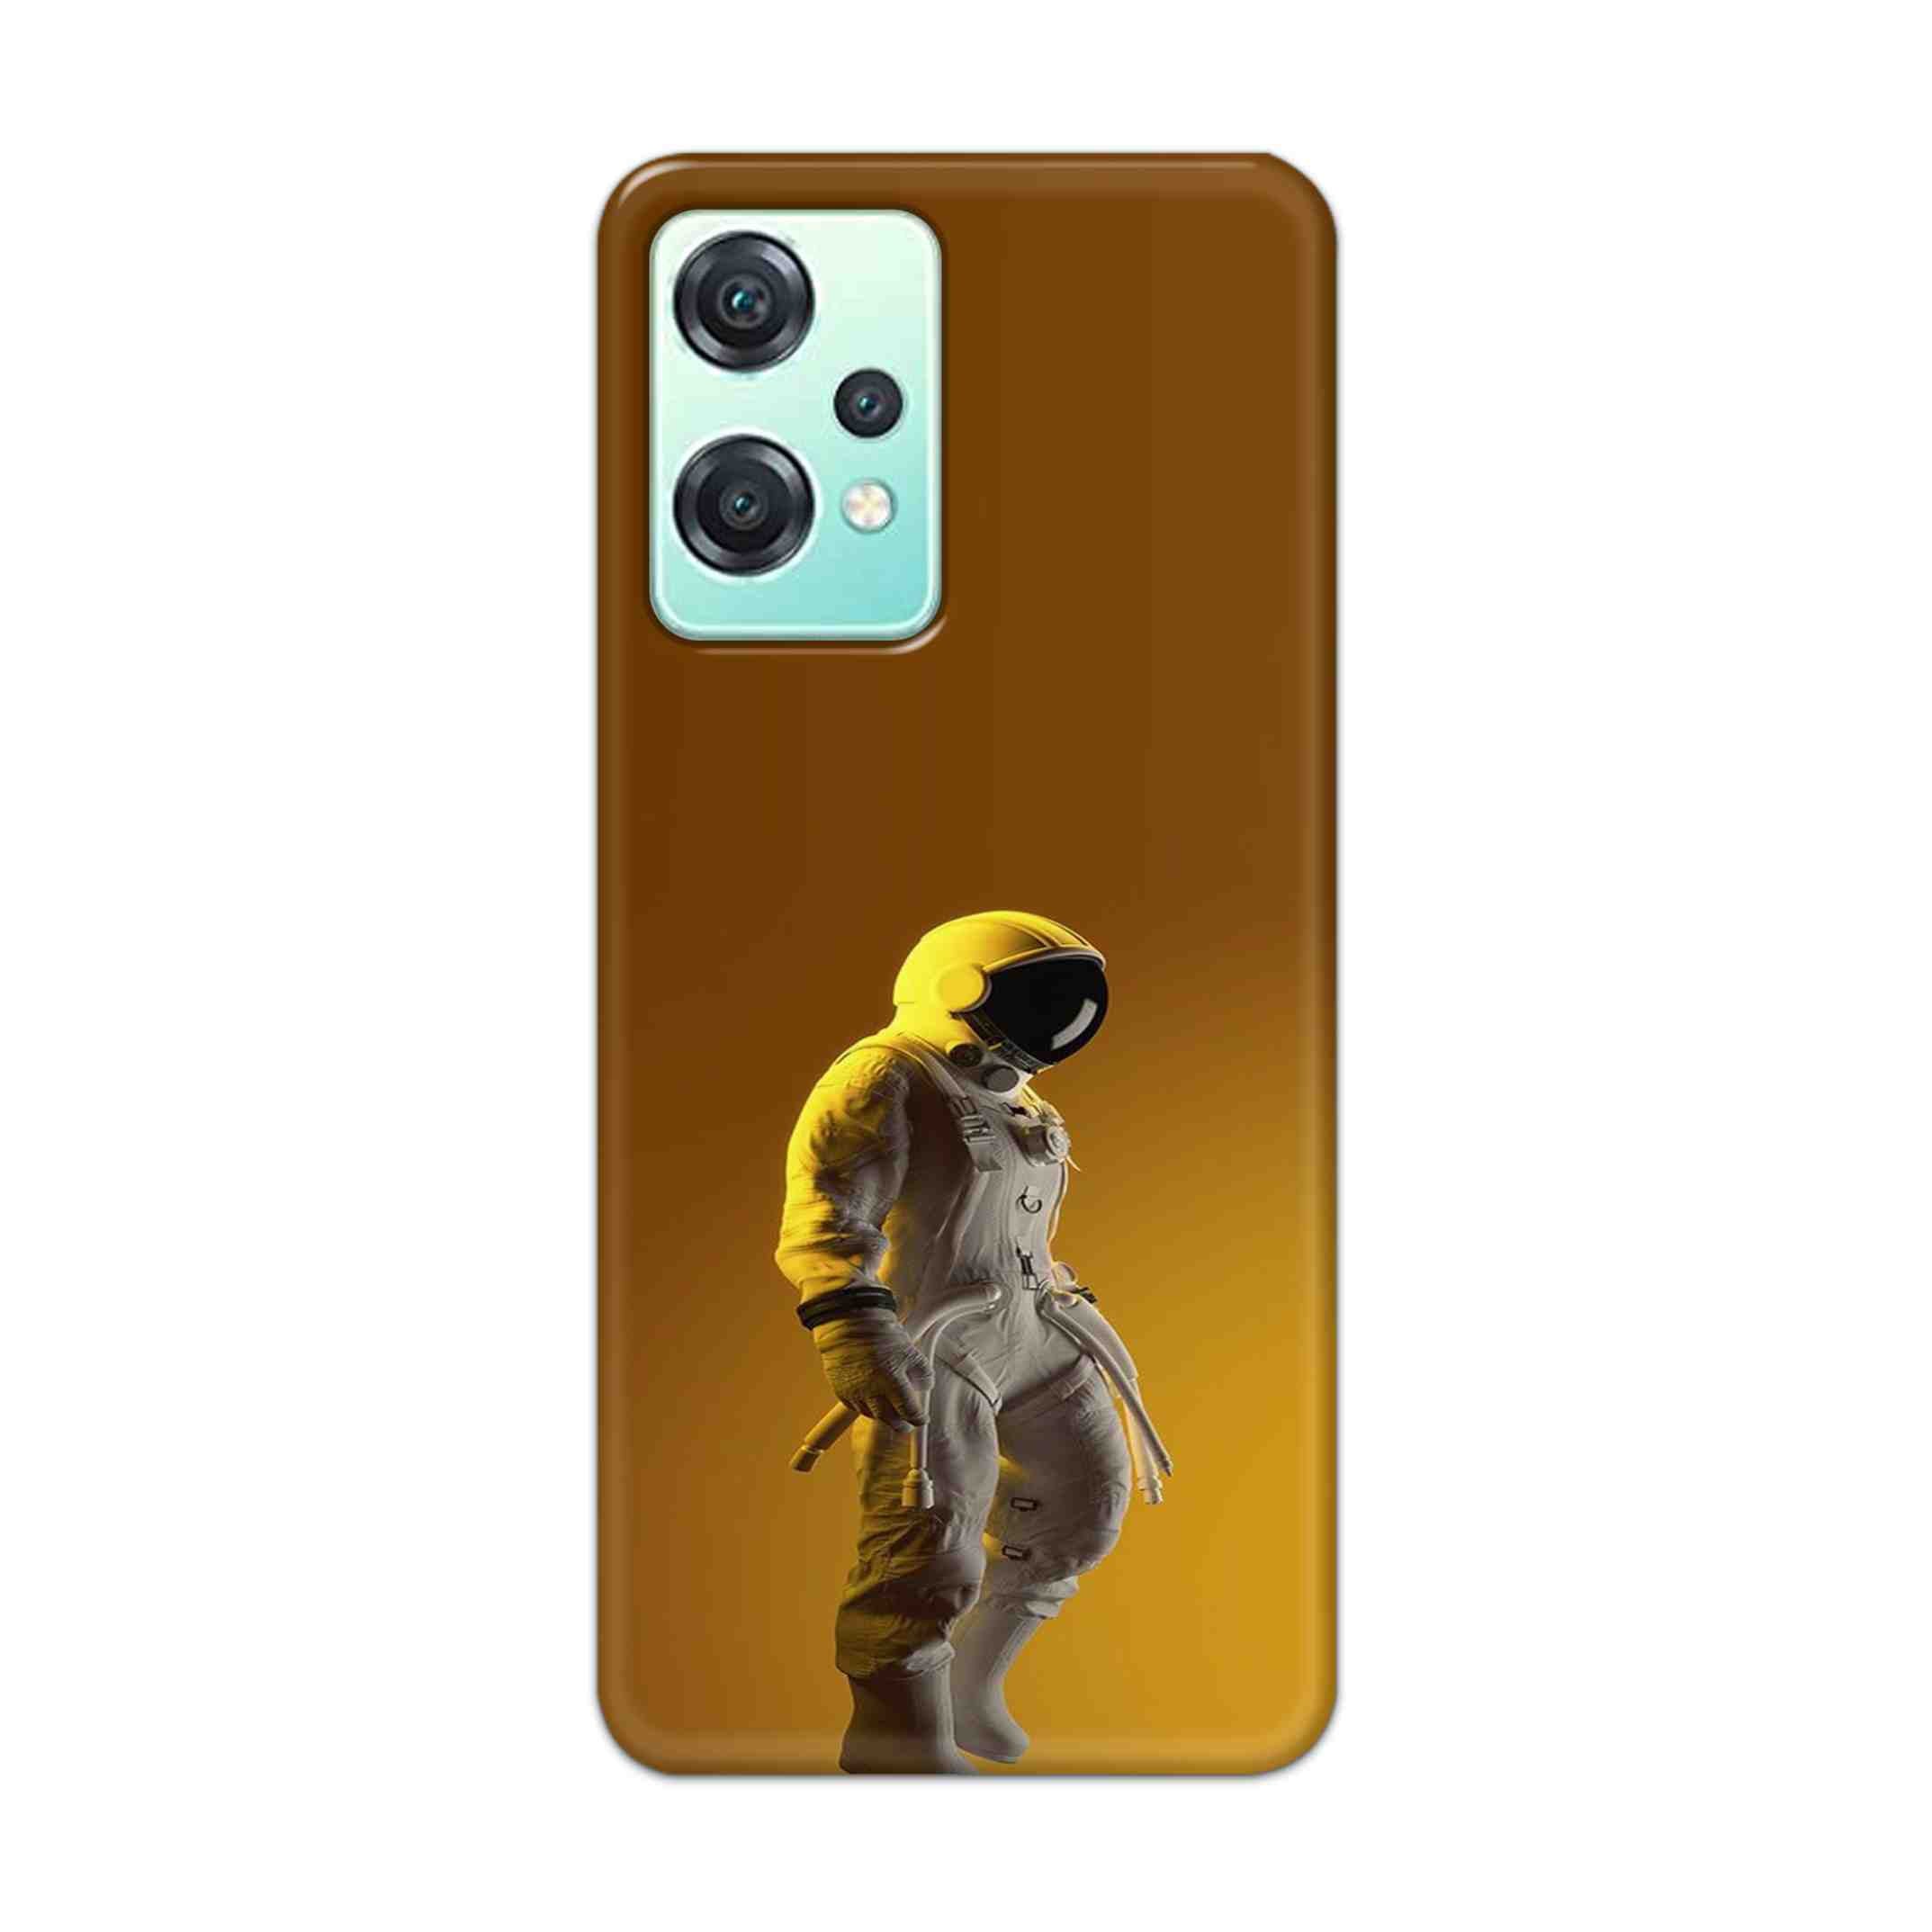 Buy Yellow Astronaut Hard Back Mobile Phone Case Cover For OnePlus Nord CE 2 Lite 5G Online